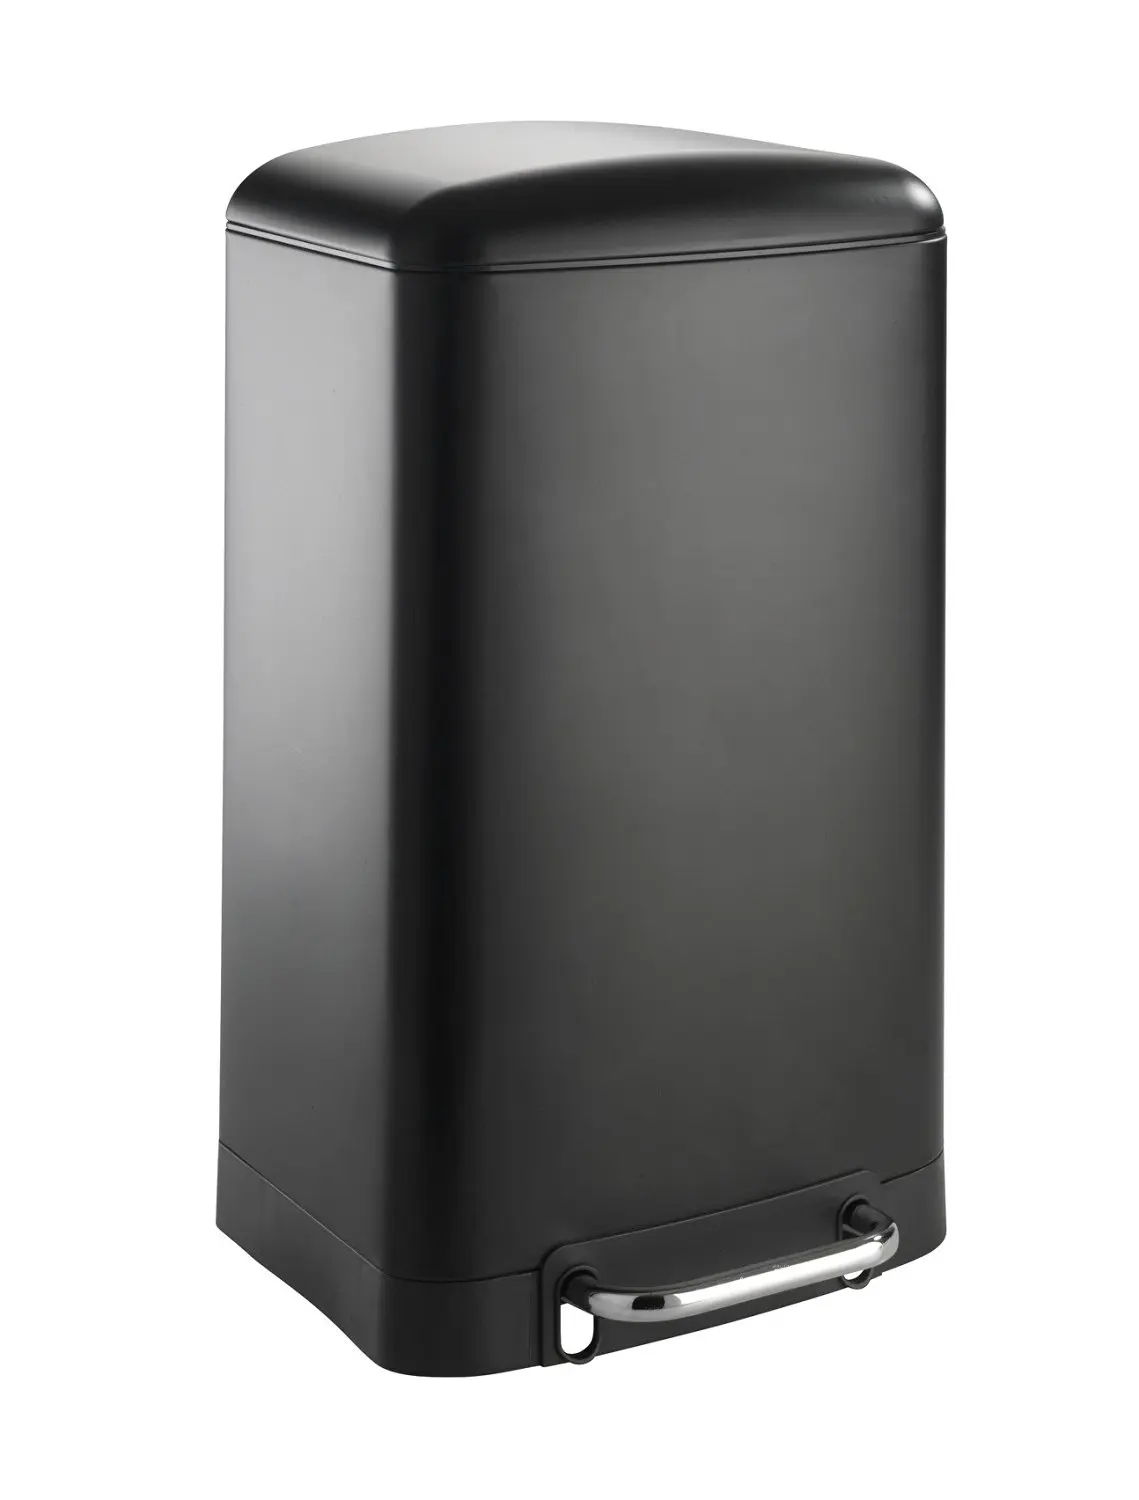 Round Touch Trash can Black Florida. Easy close